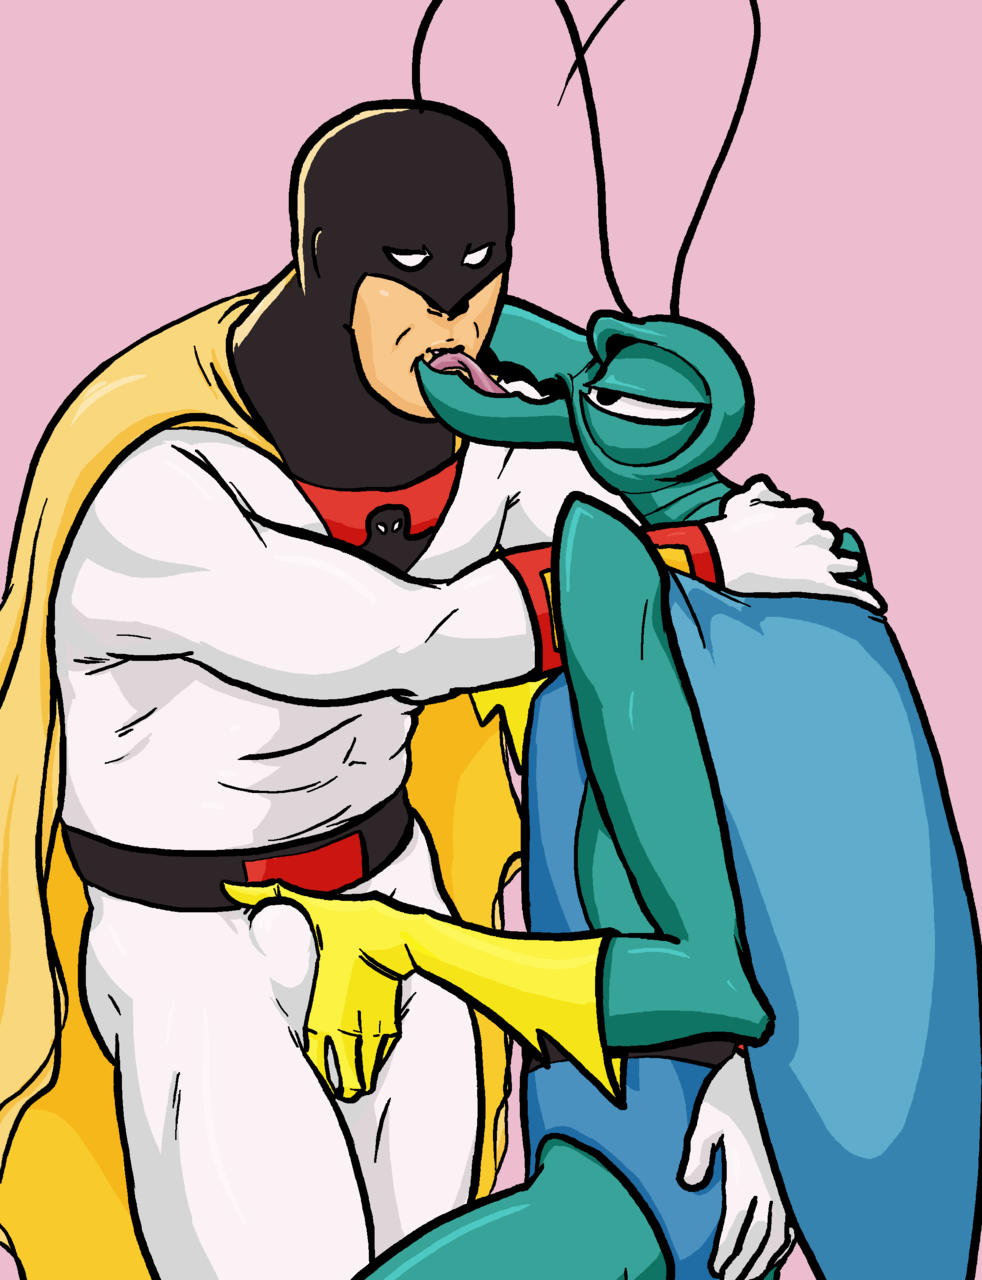 space ghost porn space ghost rule porn rule if it exists there is porn